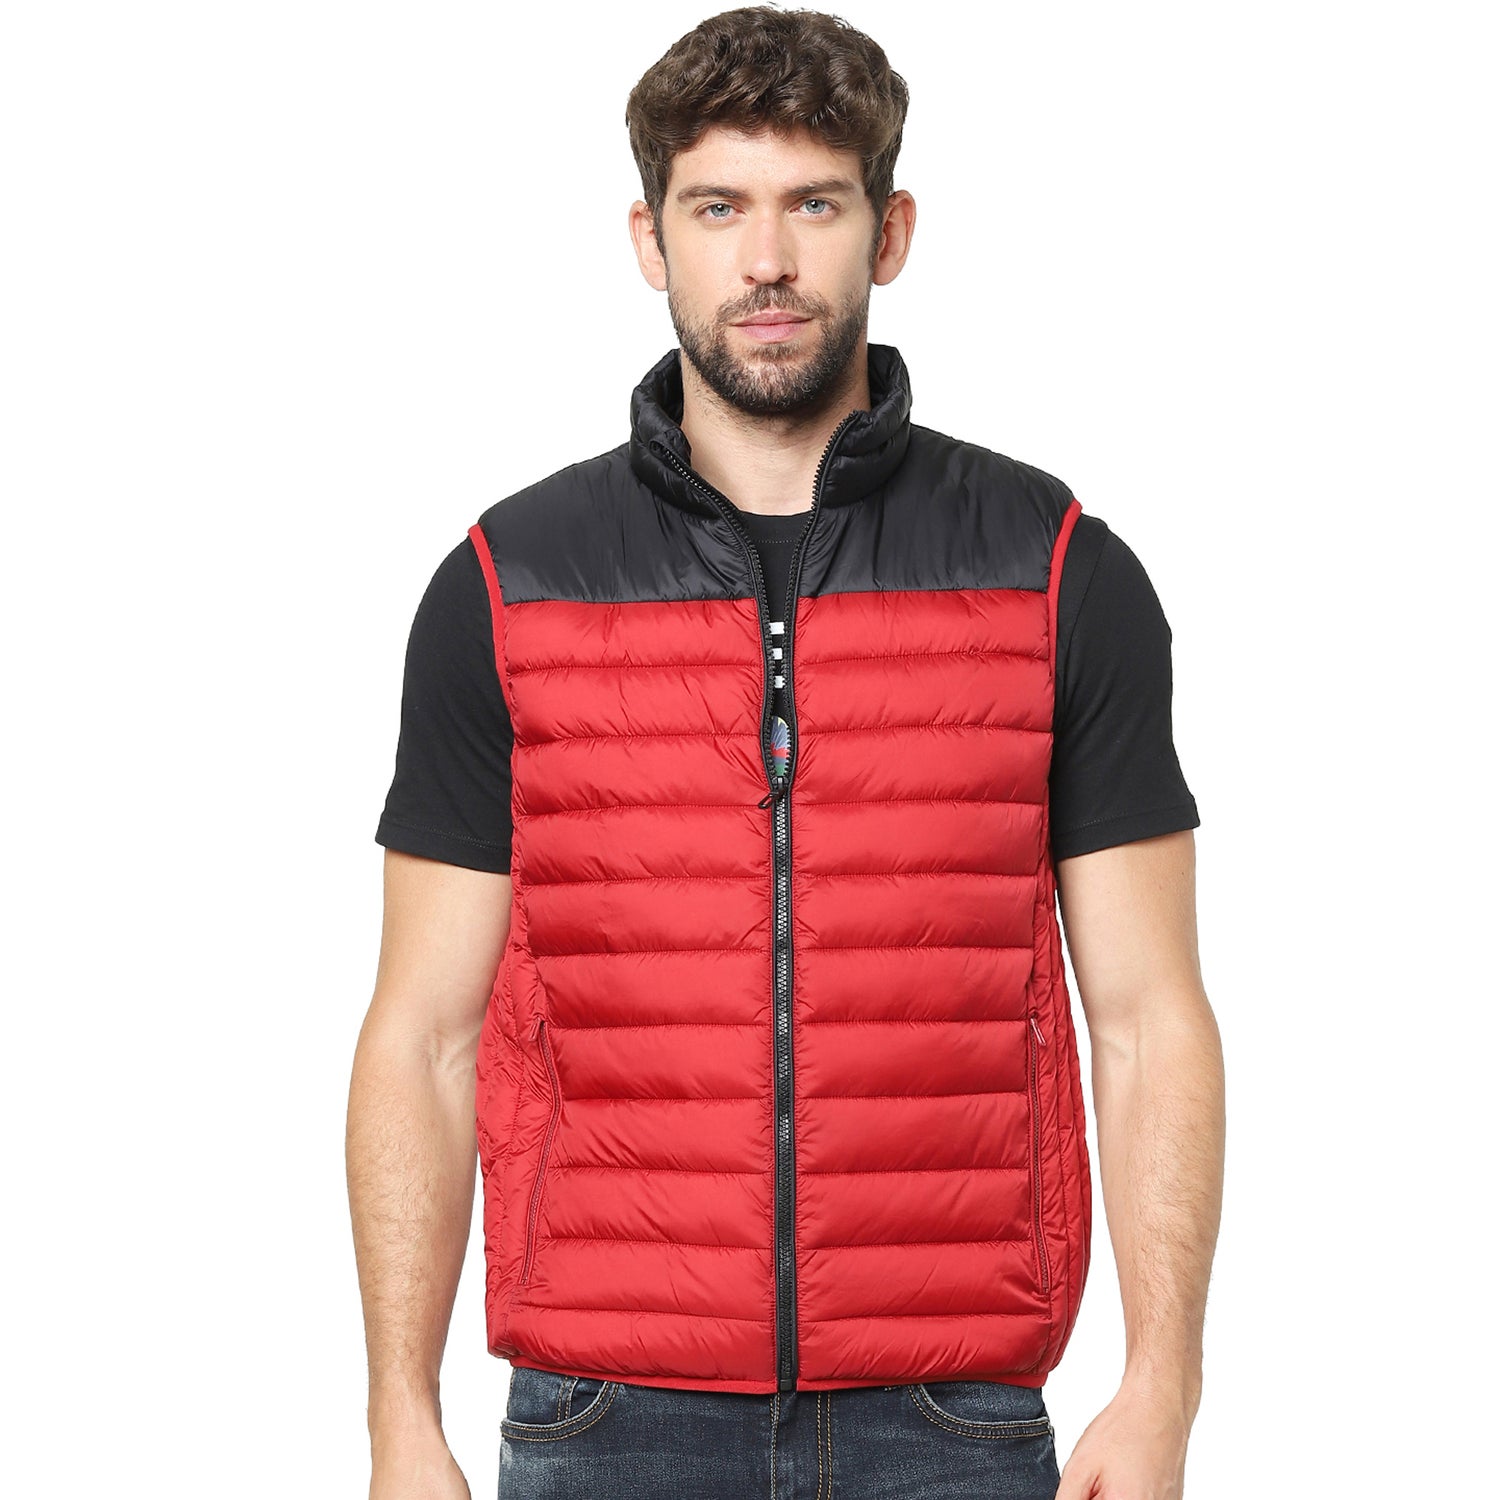 Red and Black Colourblocked Sleeveless Padded Jacket (VULESSBLOCI)